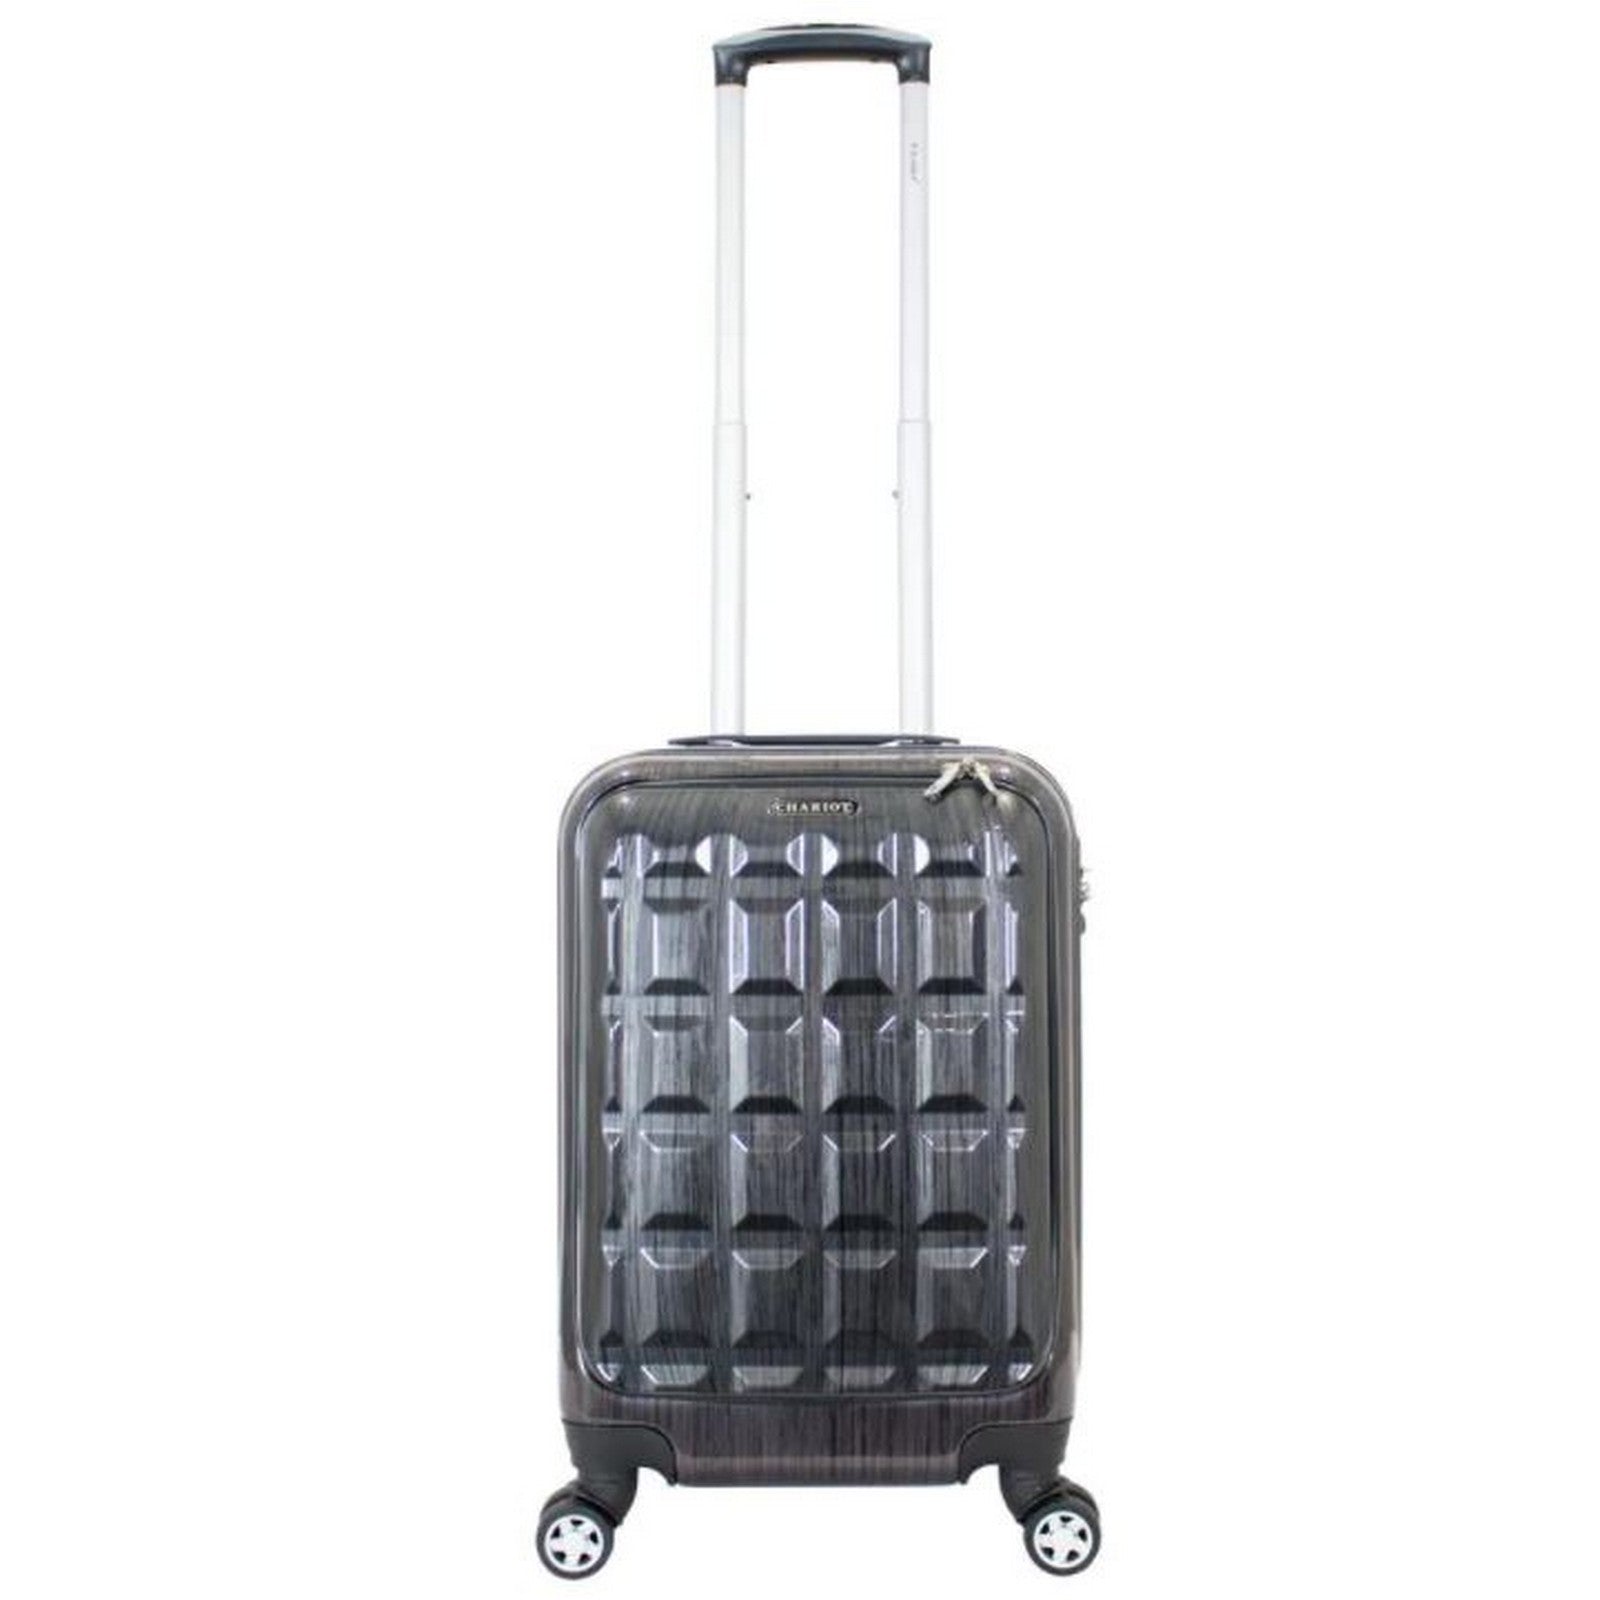 Chariot Duro 20-inch Carry-On Spinner Suitcase with Laptop Pocket